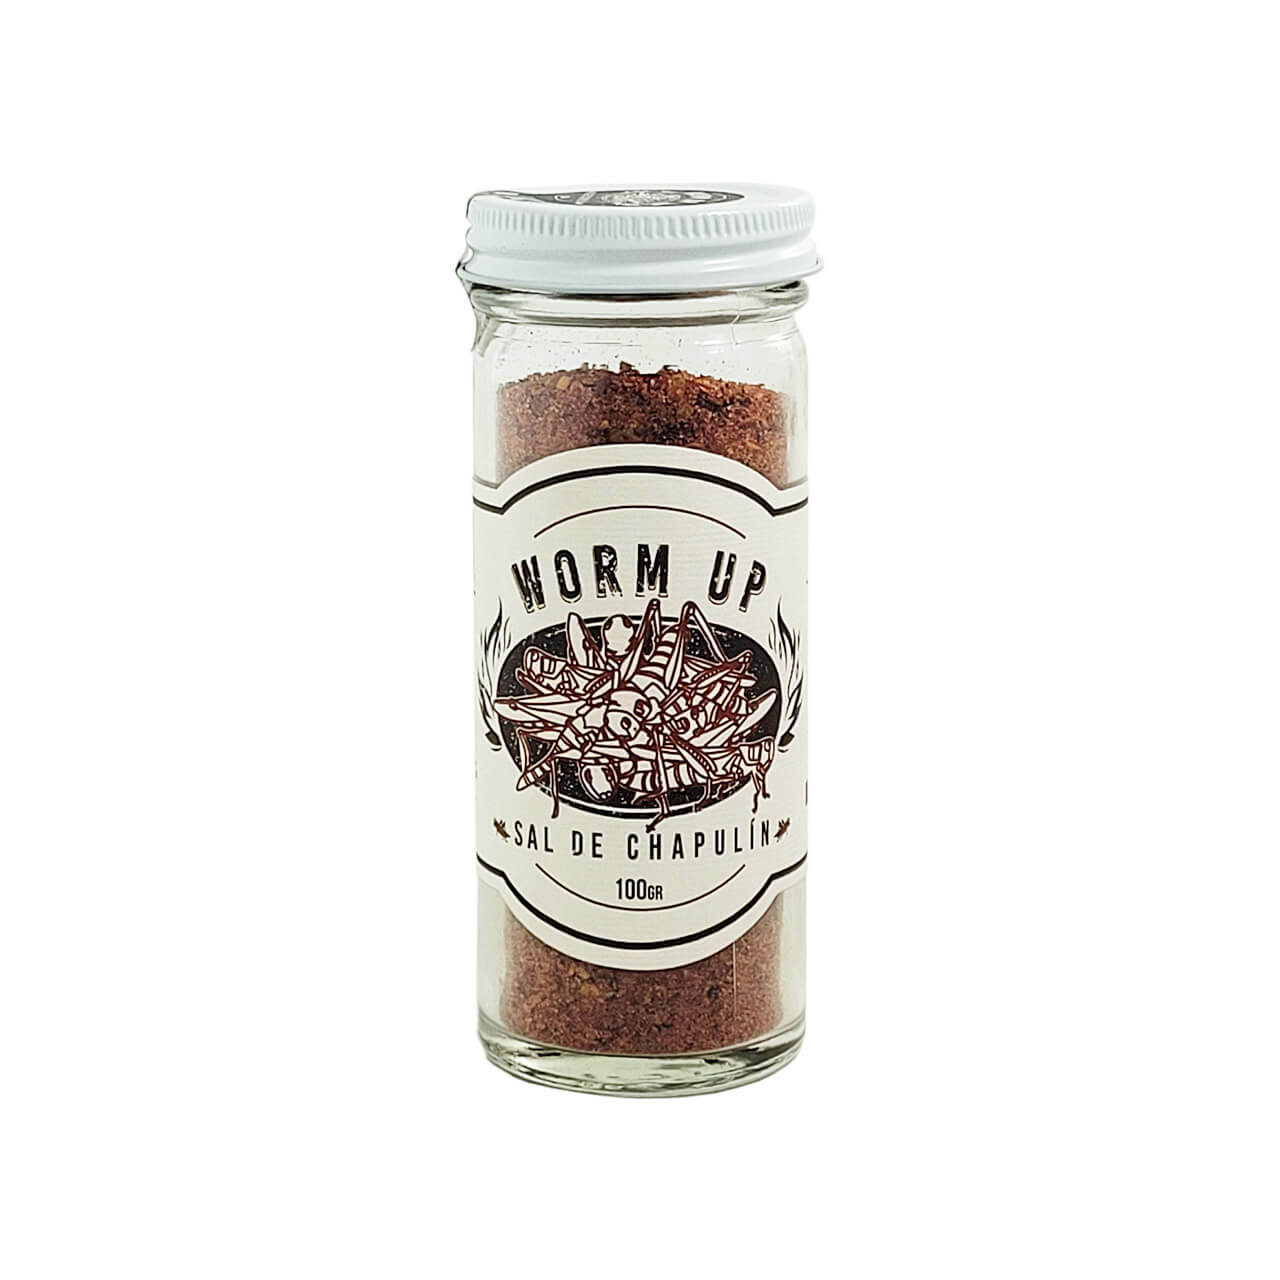 Product image for “Worm Up Chapulin (Grasshopper) Salt”